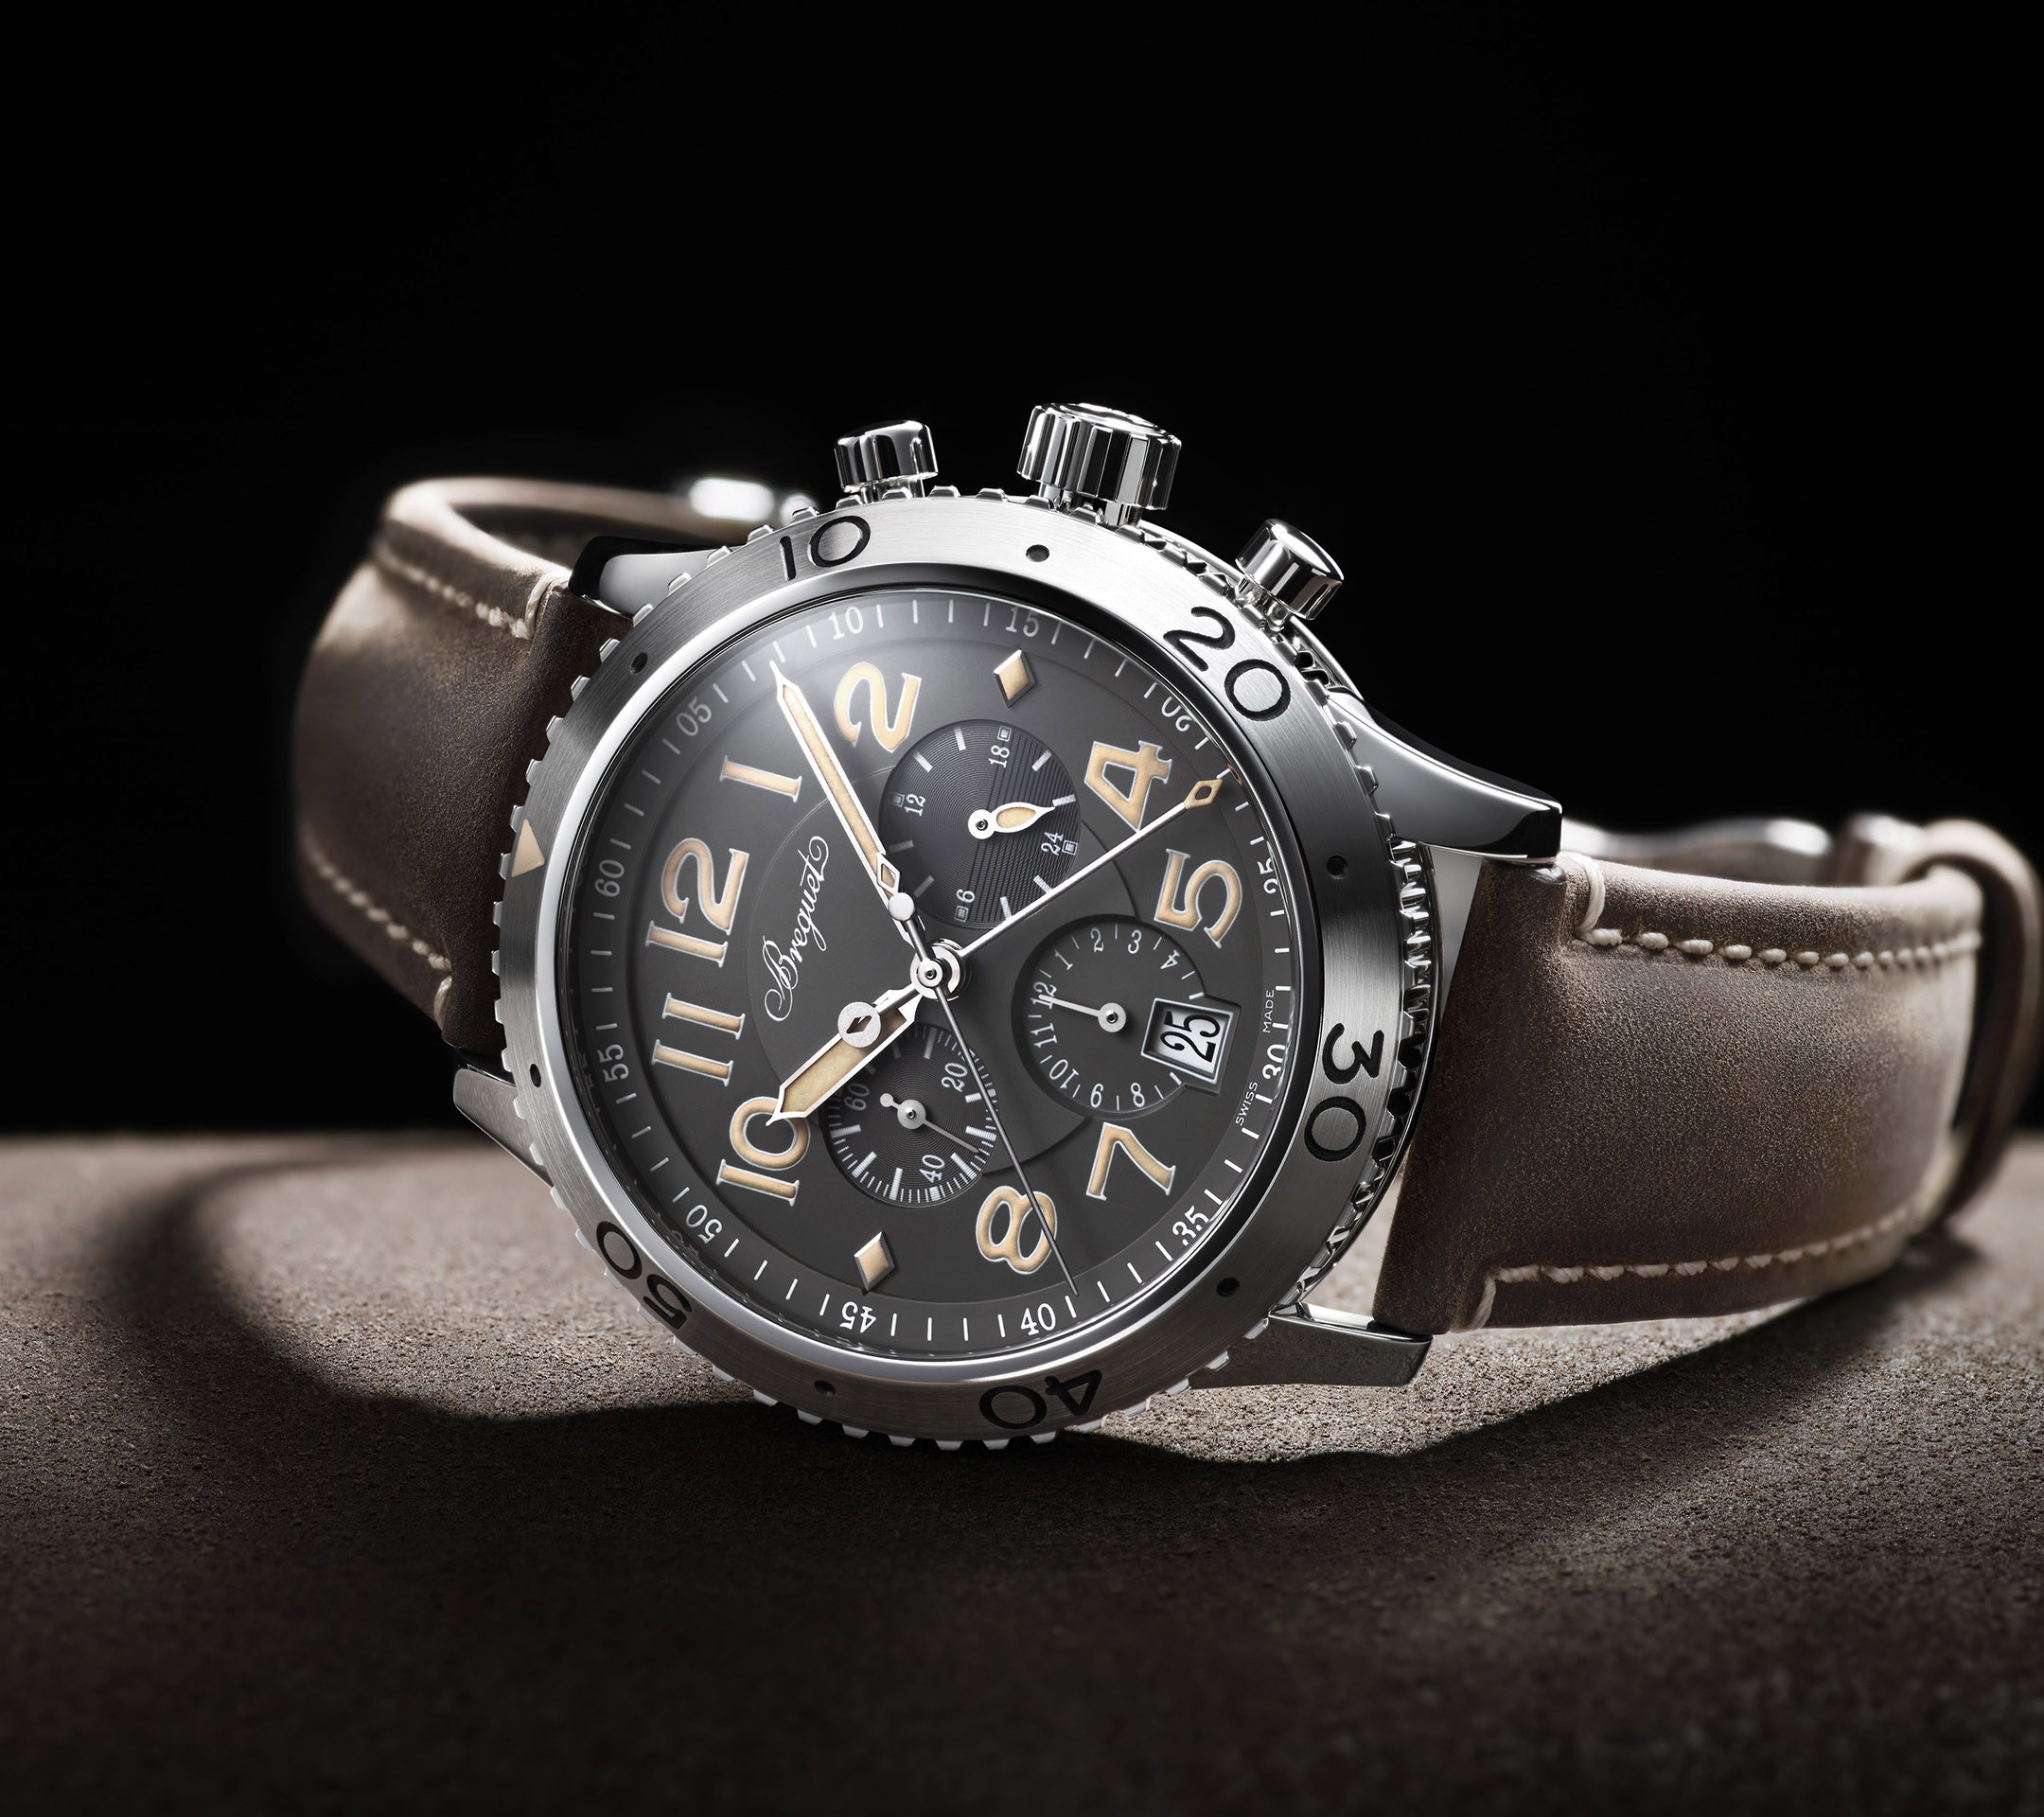 2160x1920 Breguet watch with brown leather strap Wallpaper